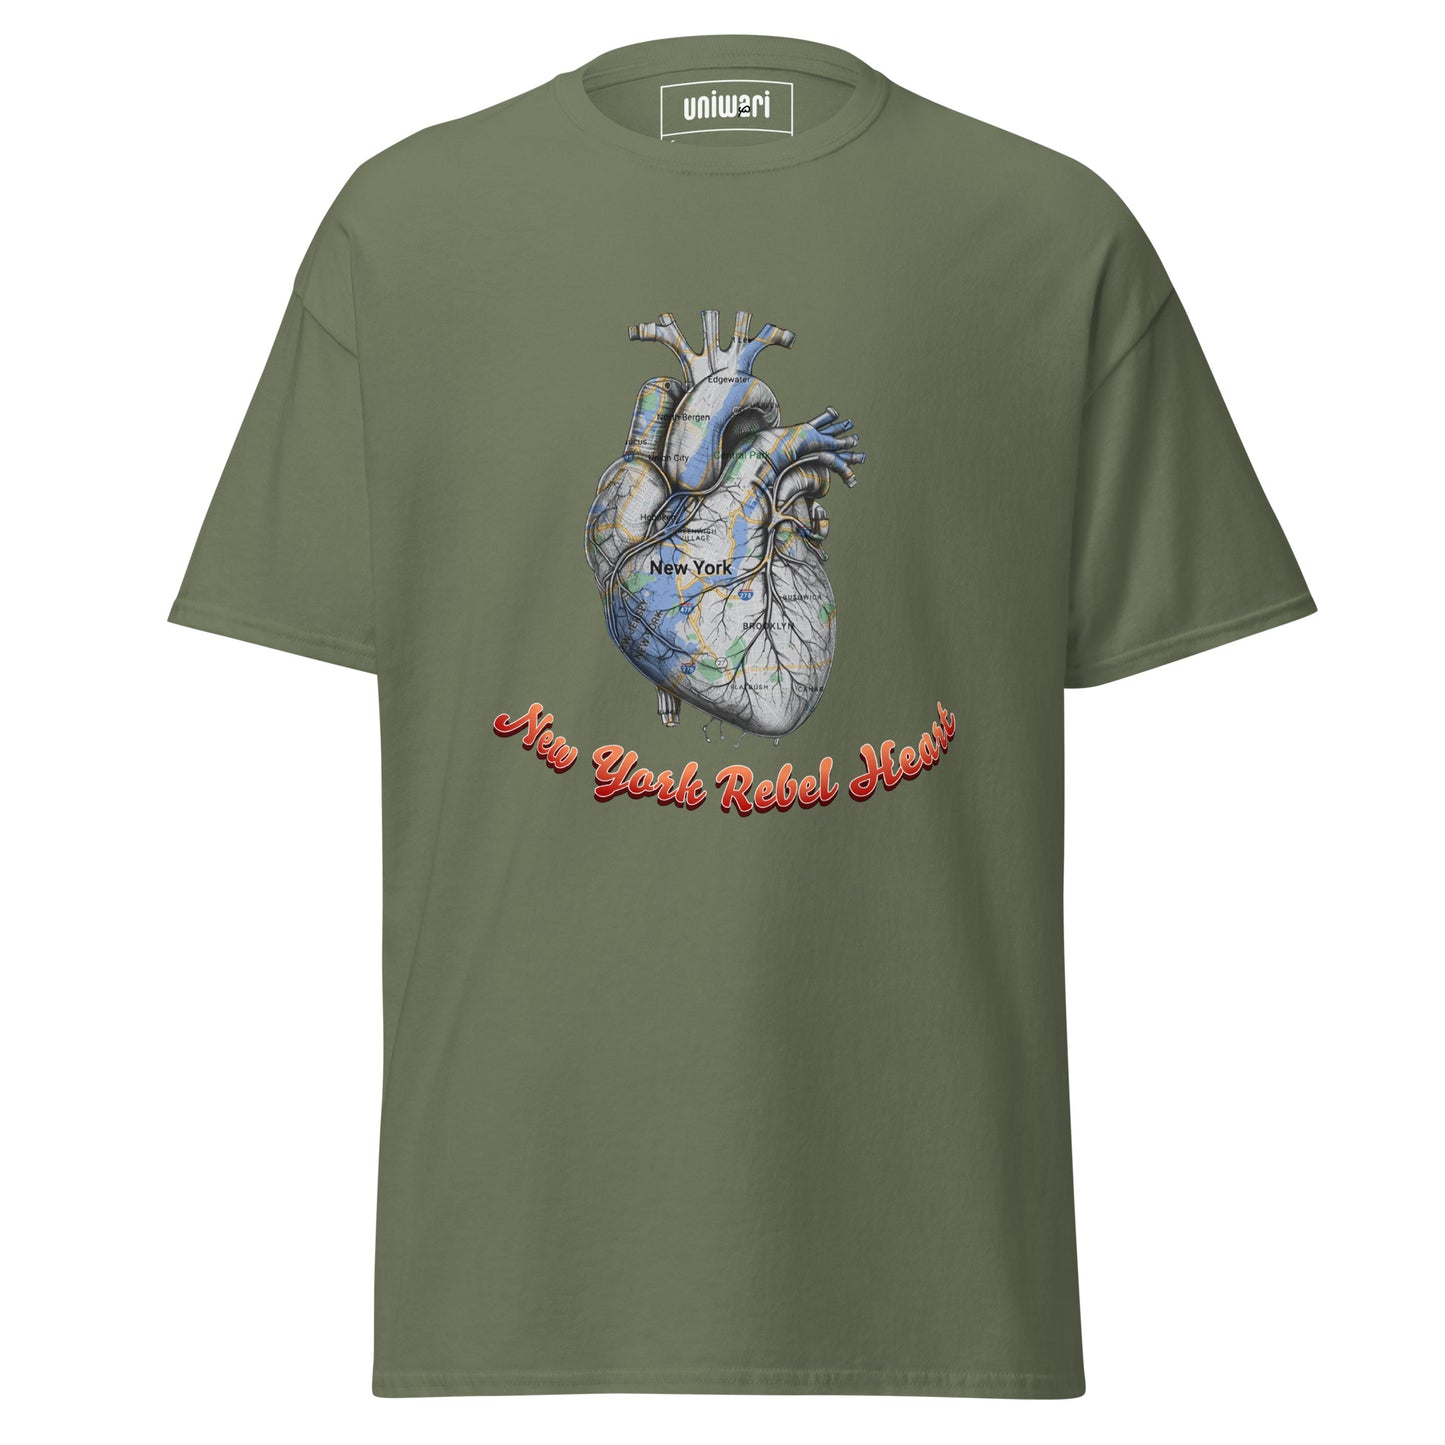 Green High Quality Tee - Front Design with a Heart Shaped Map of New York and a Phrase "New York Rebel Heart" print